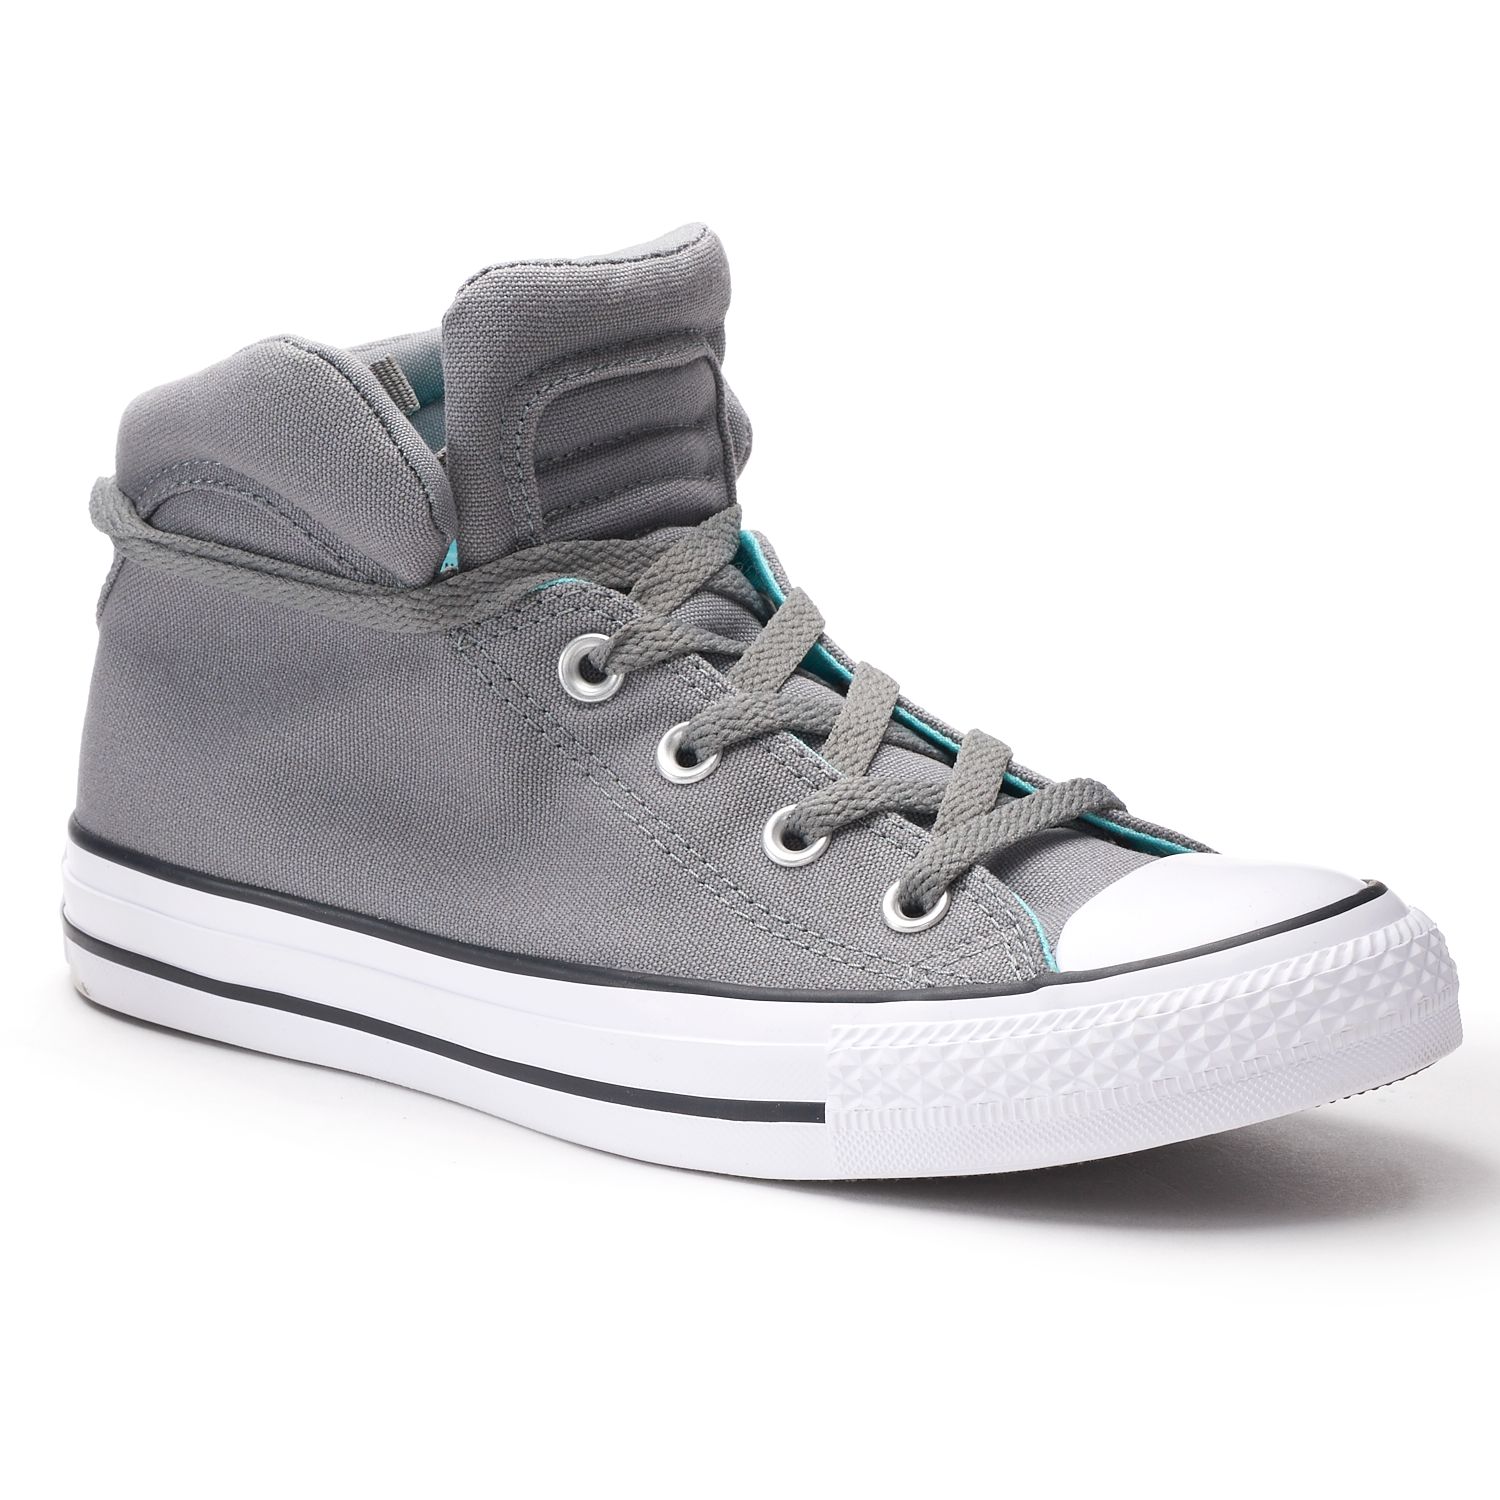 converse women's chuck taylor all star brookline mid shoes